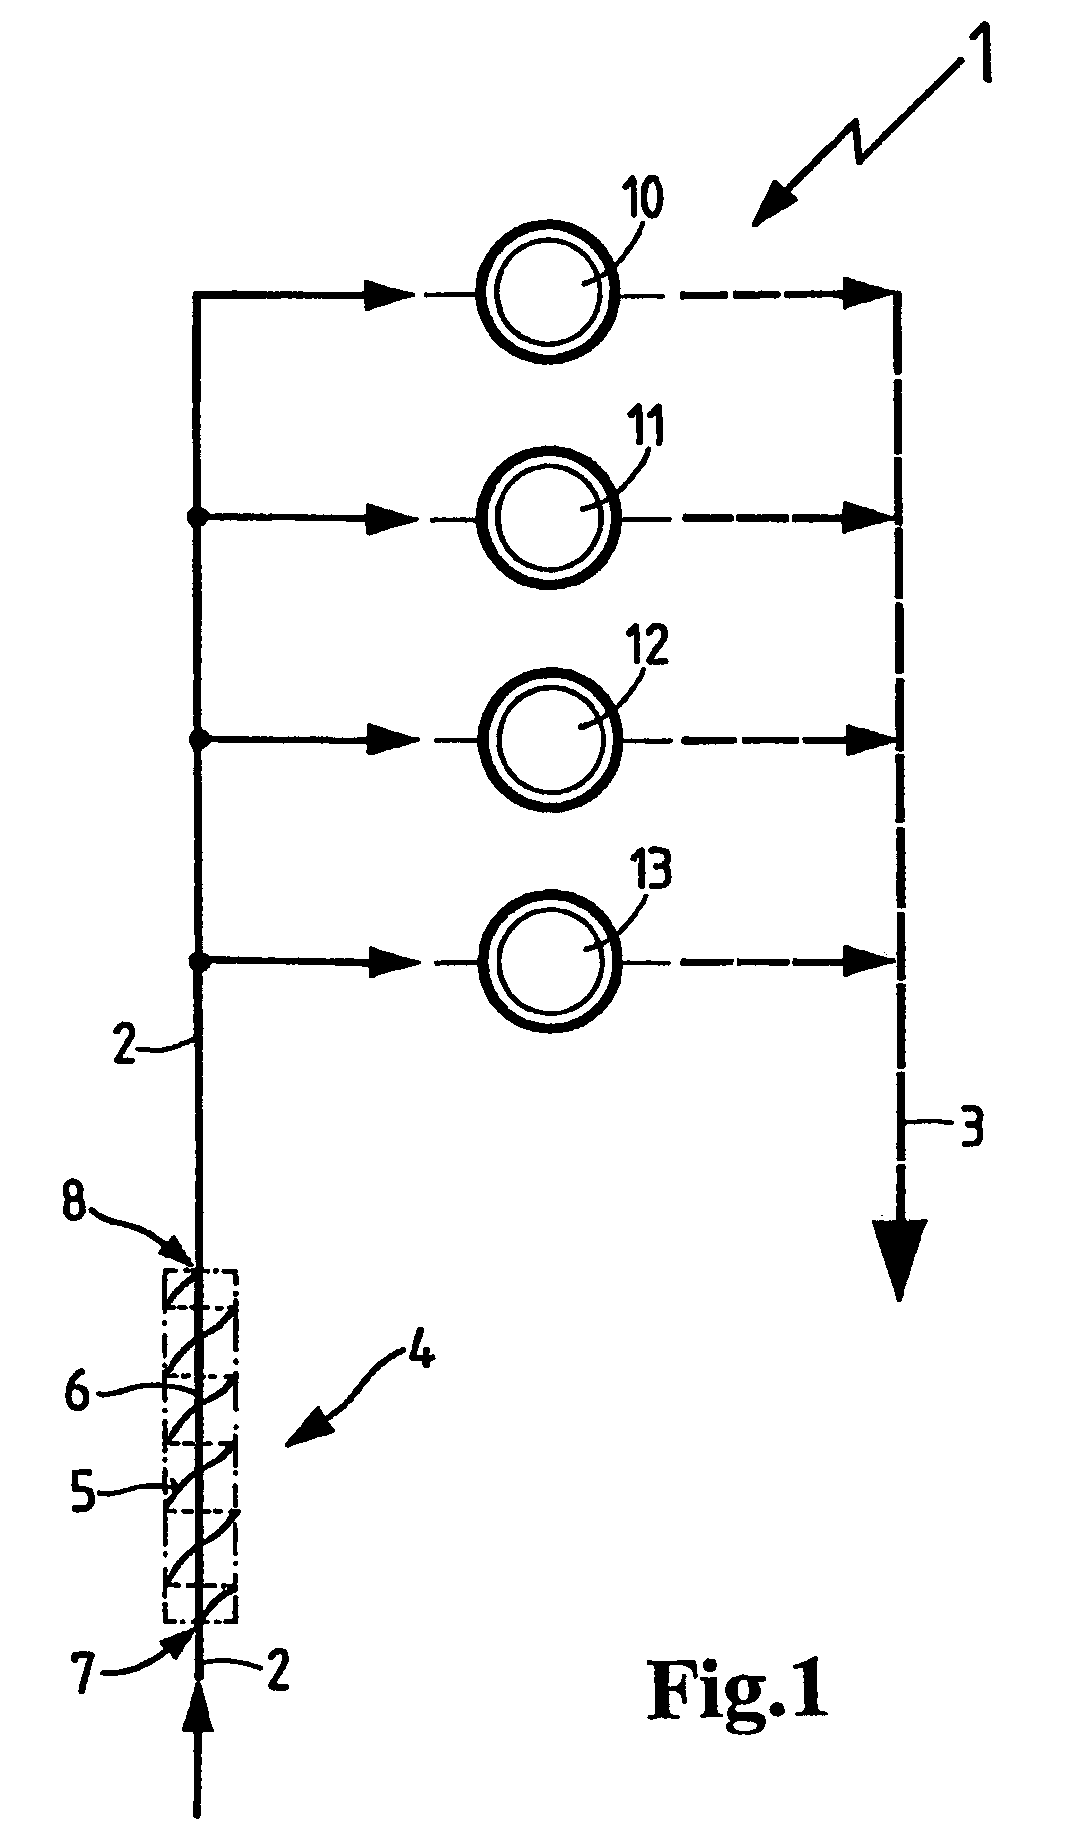 Noise suppressor apparatus for a gas duct